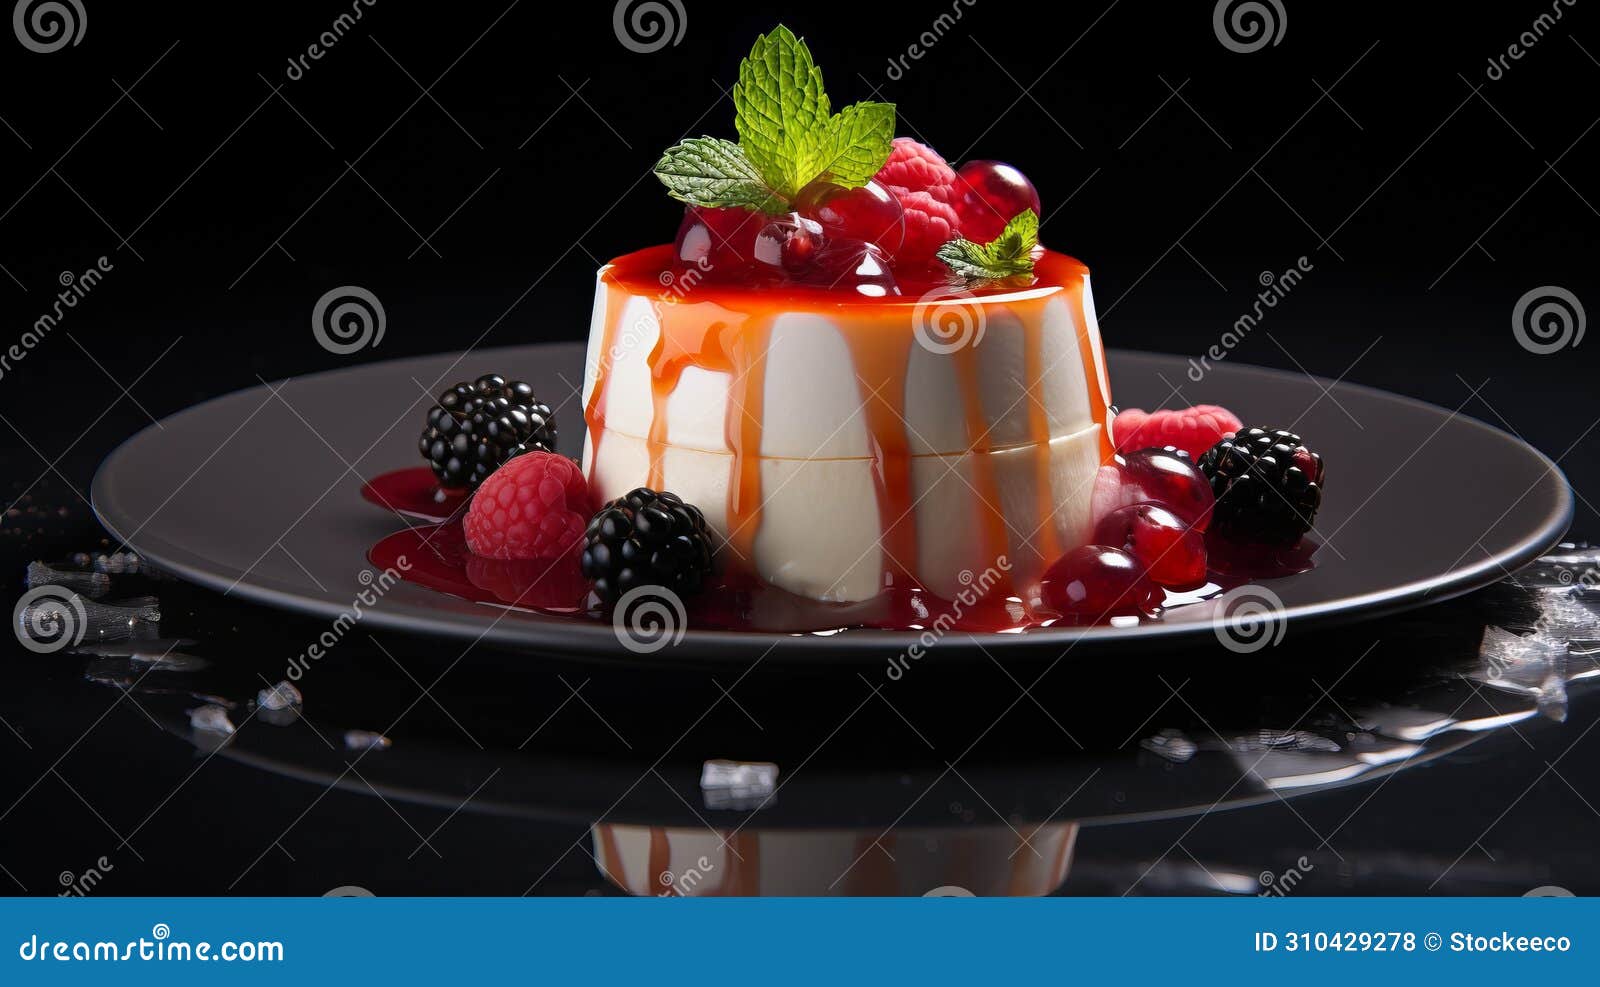 immersive panna cotta image inspired by olivier ledroit, miki asai, and herve guibert